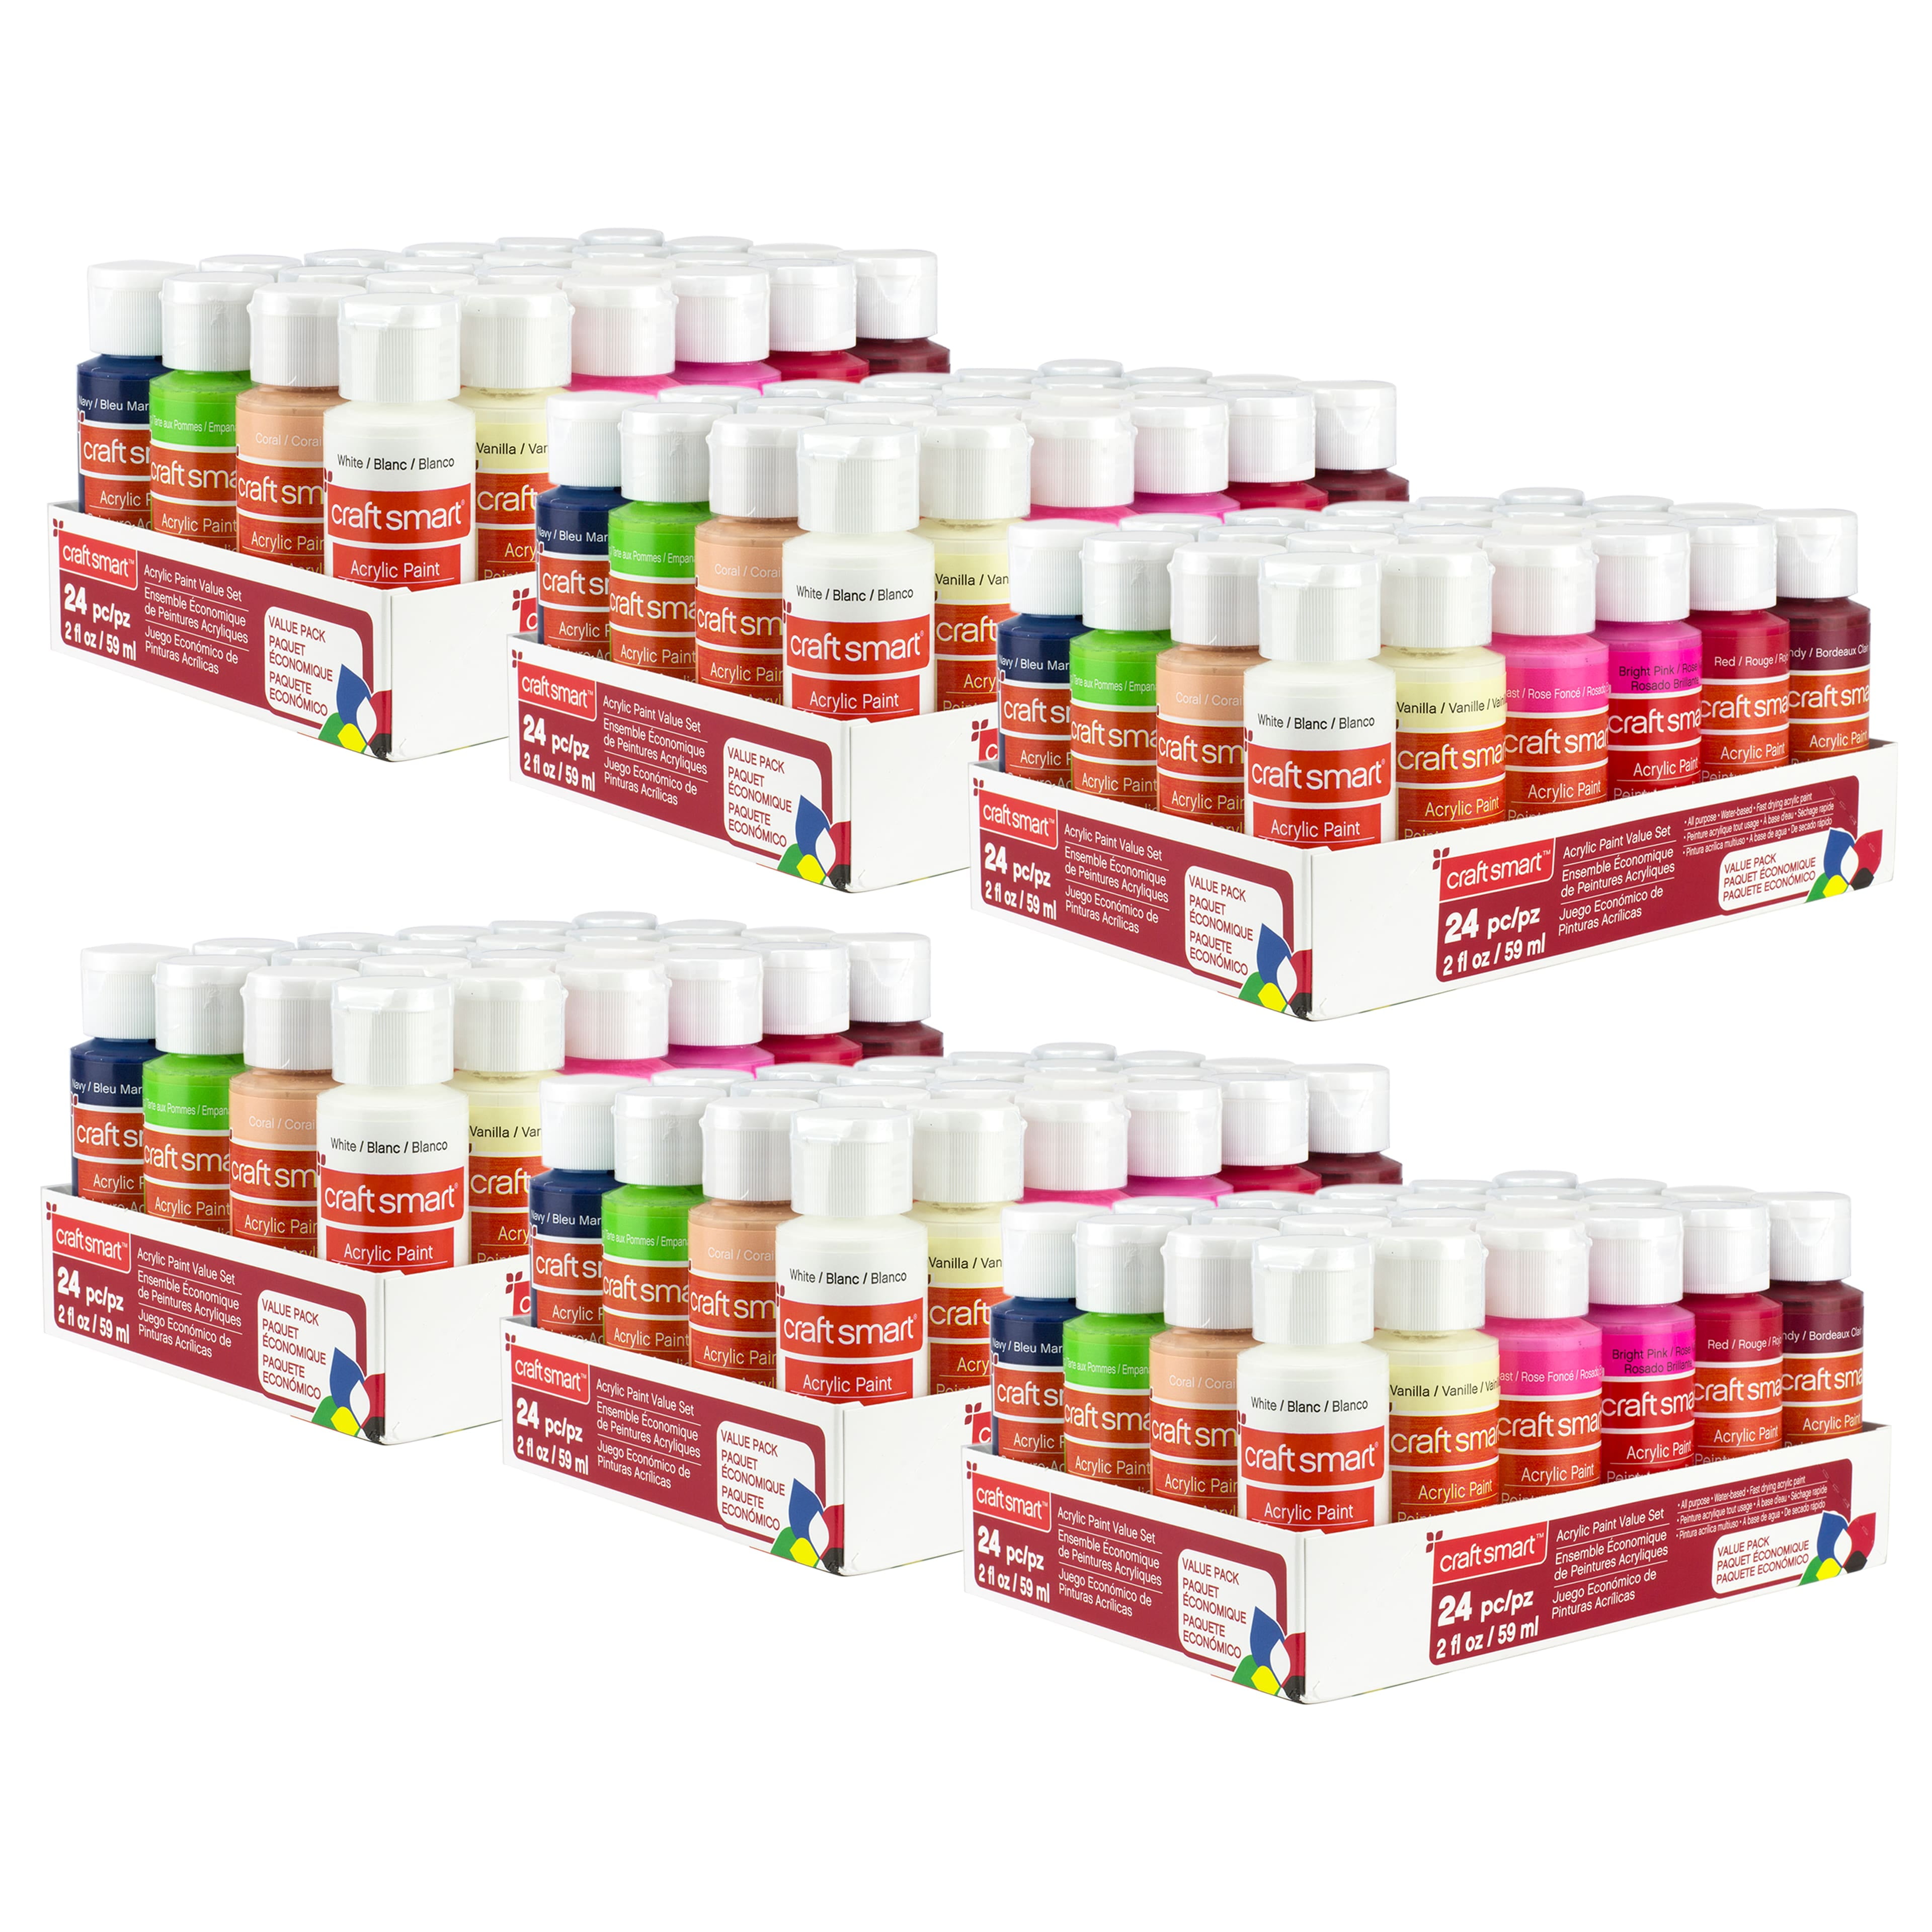 Incraftables Acrylic Paint Set w/ 24 Colors Acrylic Paints, 12 Brushes, Sponge, Pallet & Craft Knife, Size: Assorted